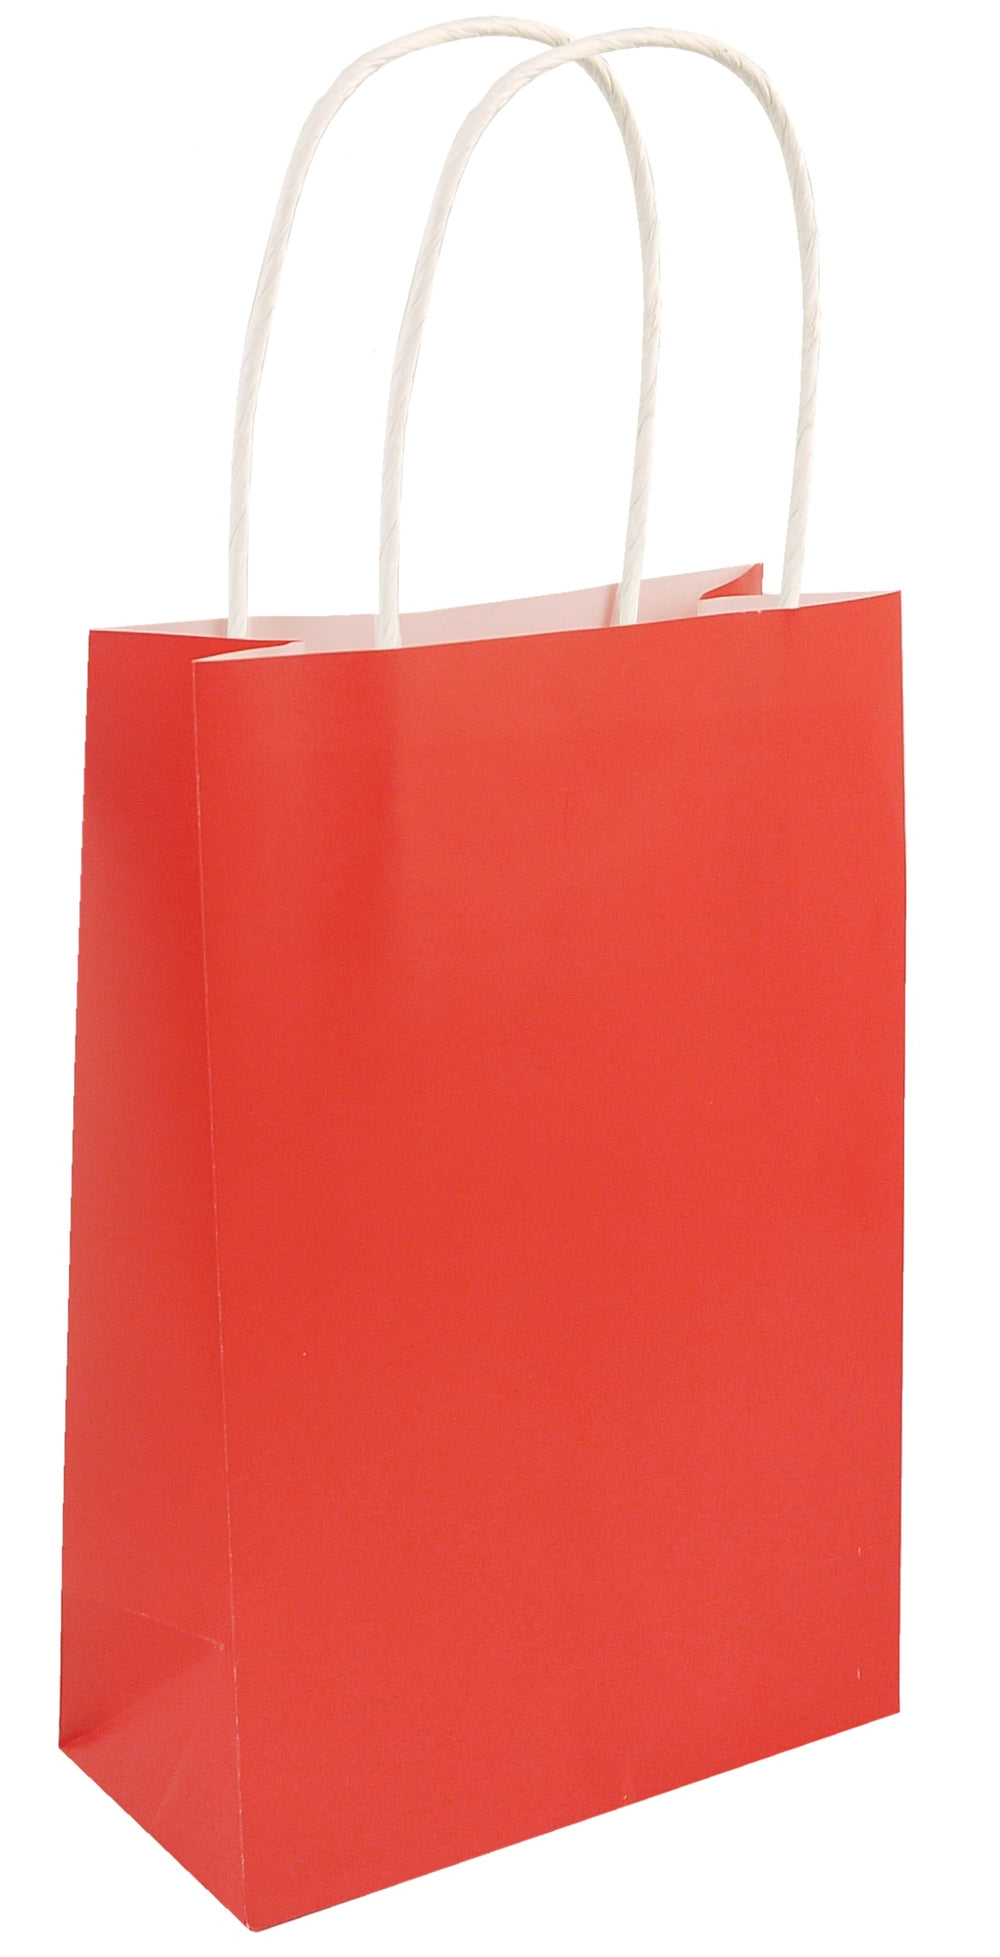 12 Red Paper Party Bags - Anilas UK